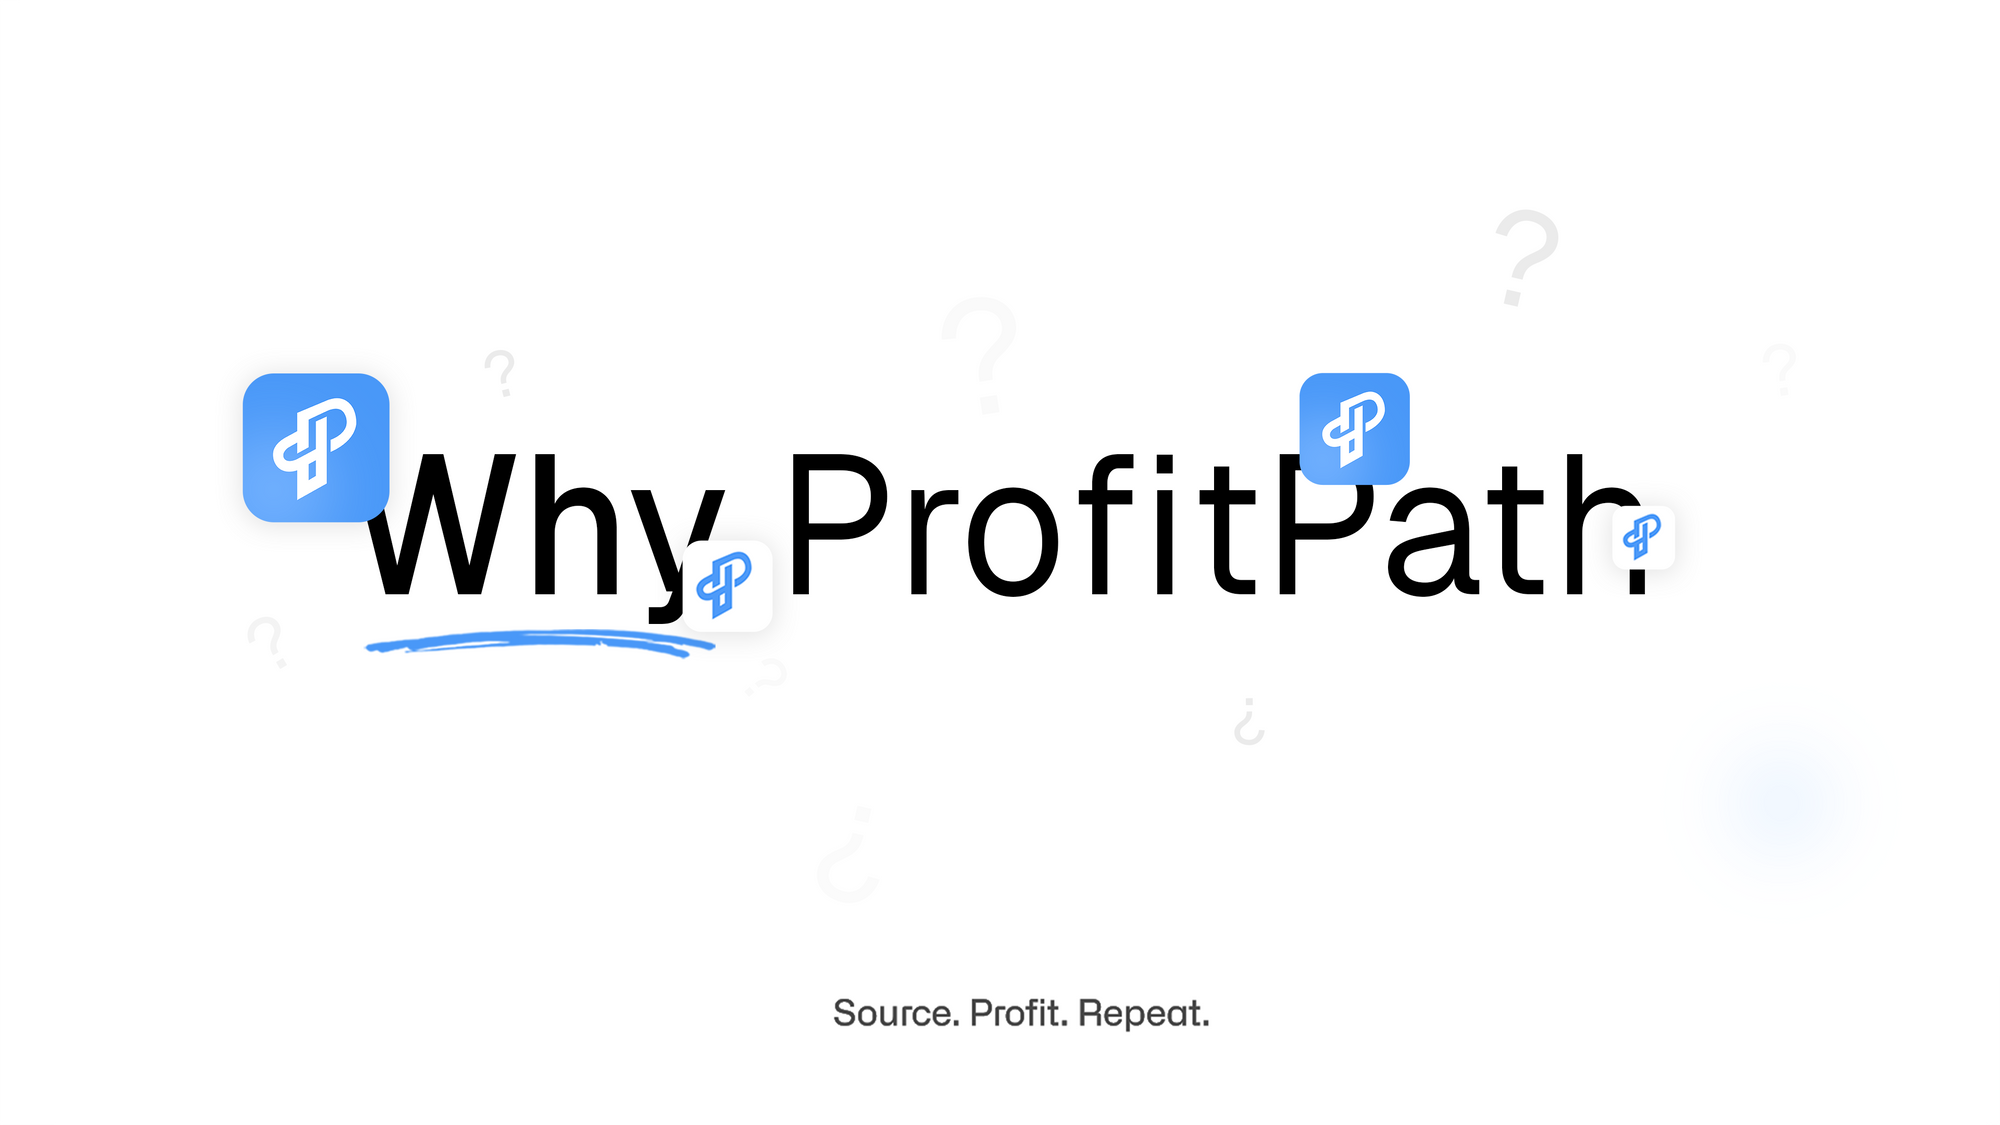 How did we come to launch ProfitPath and what are our goals? From FlareAIO, FuzeLabs, EscapeNotify, NexosSolutions, Sell-It to ProfitPath